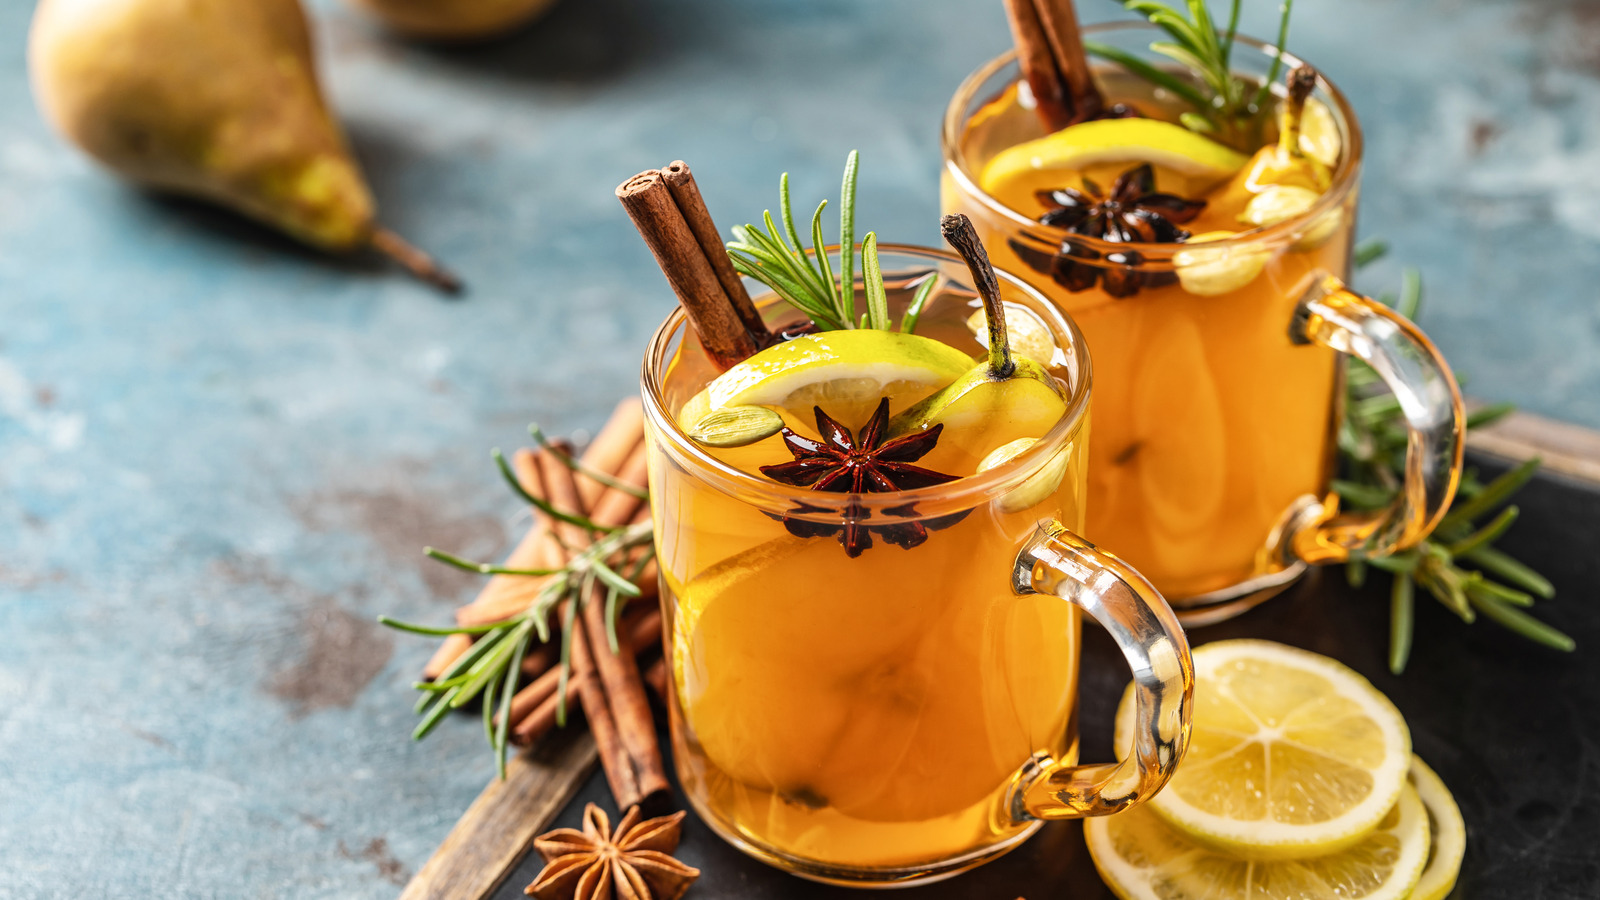 https://www.tastingtable.com/img/gallery/10-best-whiskeys-for-a-hot-toddy/l-intro-1650290937.jpg